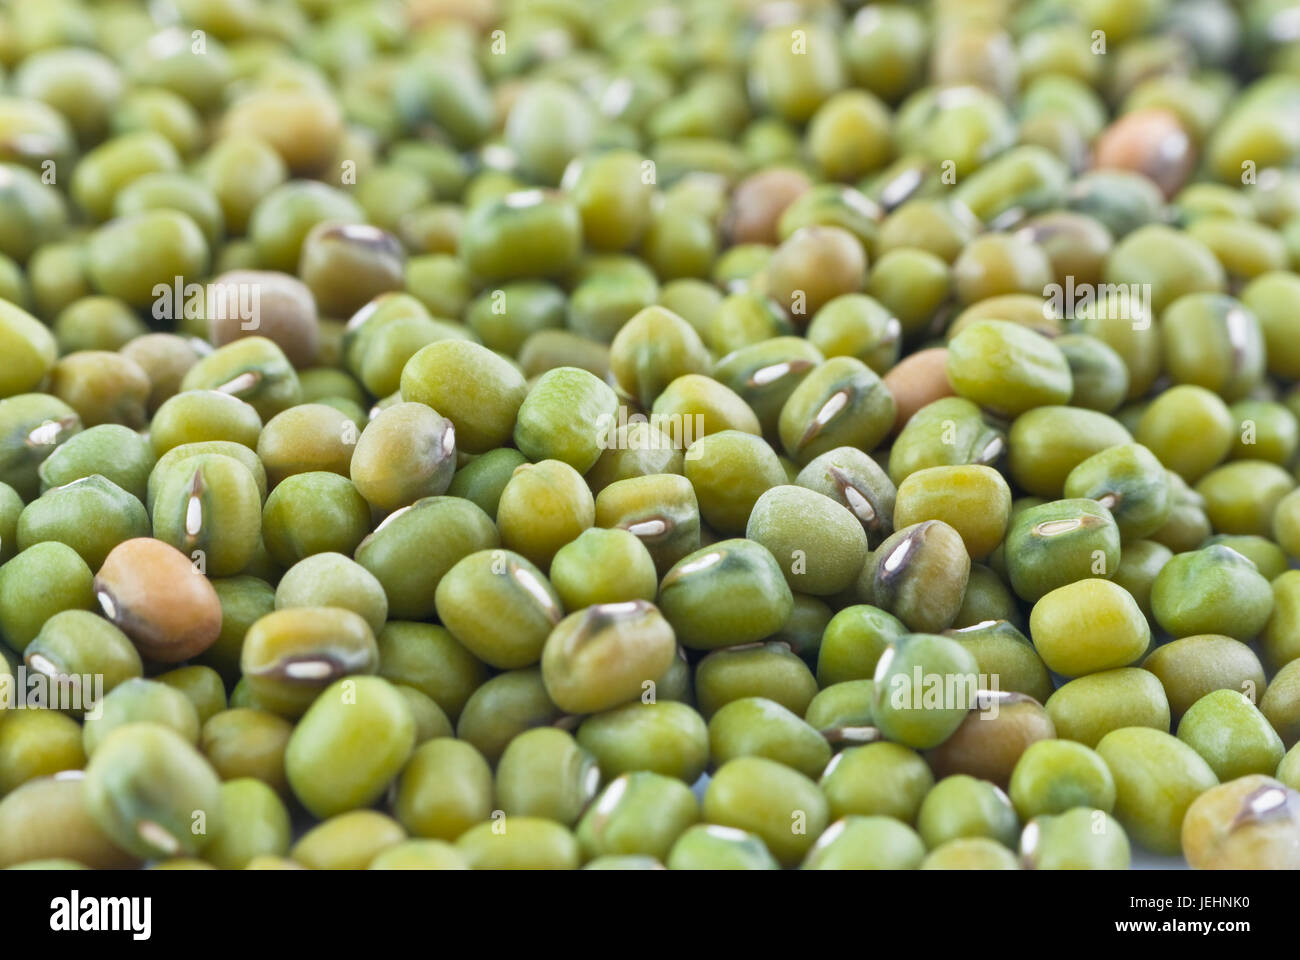 Macro (close-up) of green mung beans filling whole frame. Stock Photo